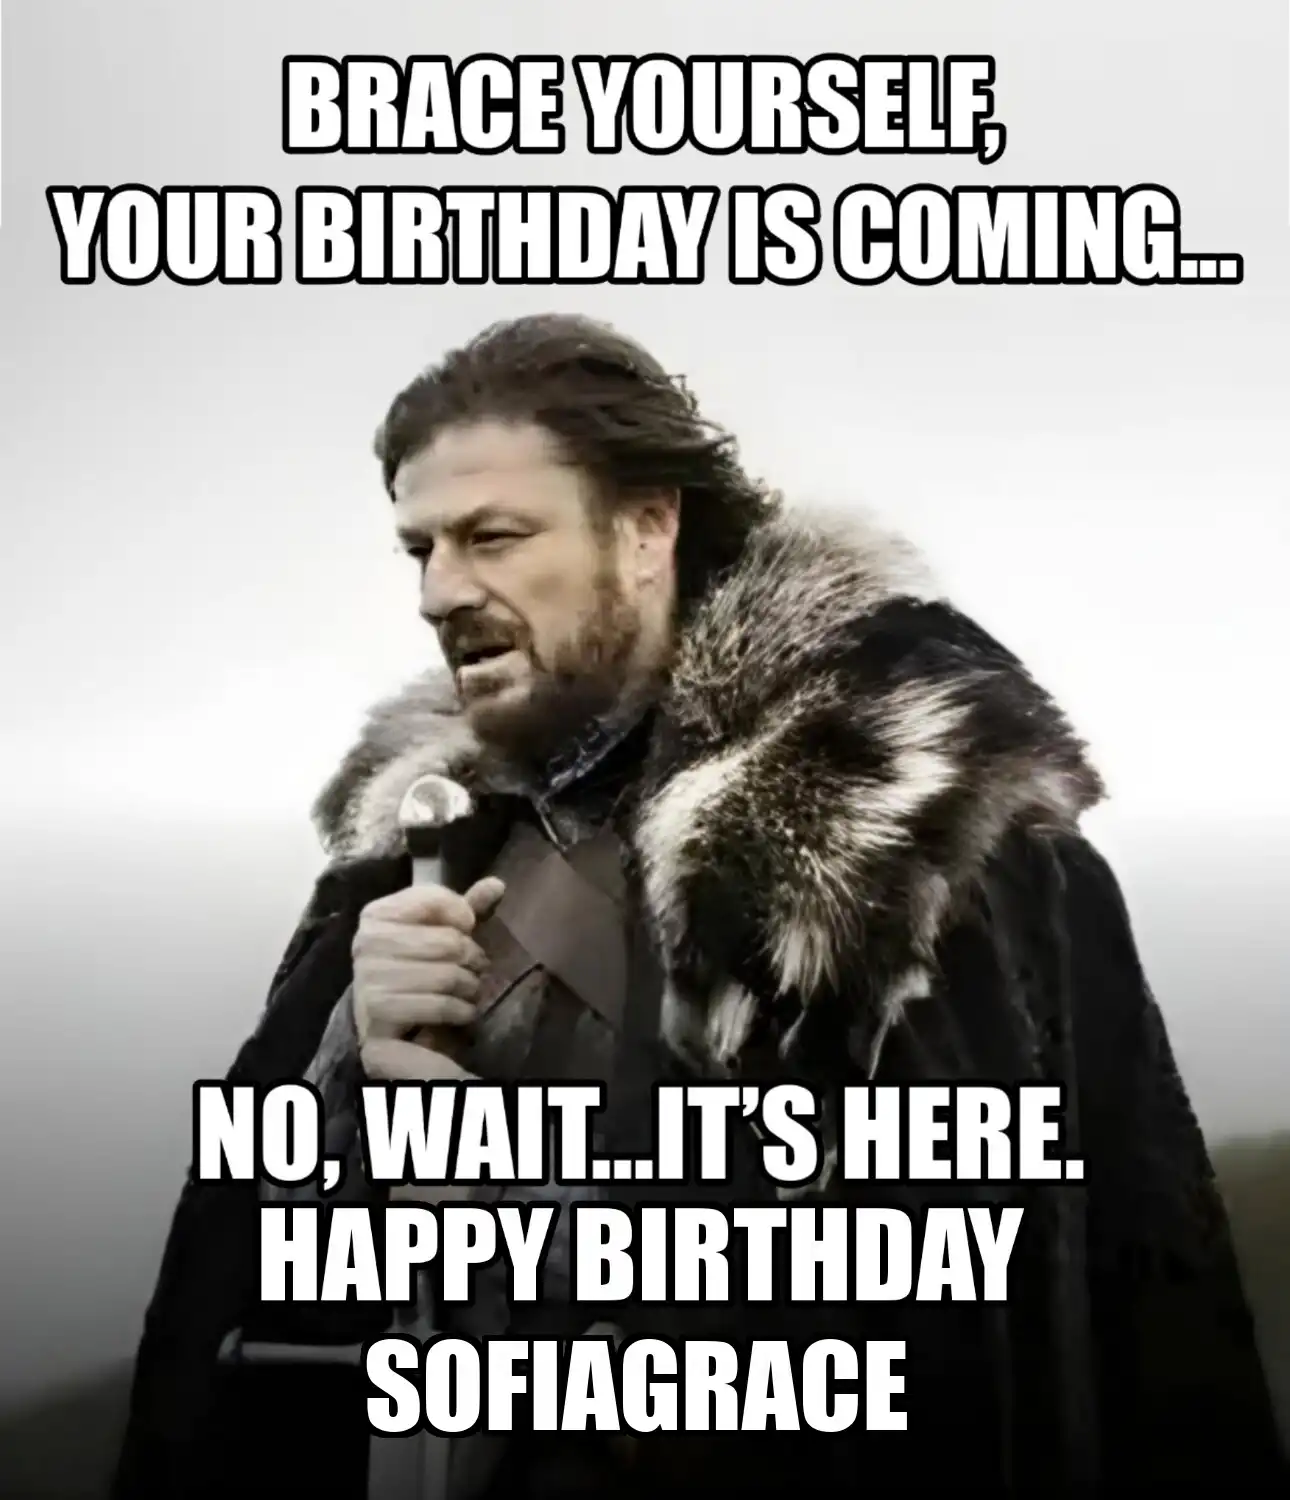 Happy Birthday Sofiagrace Brace Yourself Your Birthday Is Coming Meme